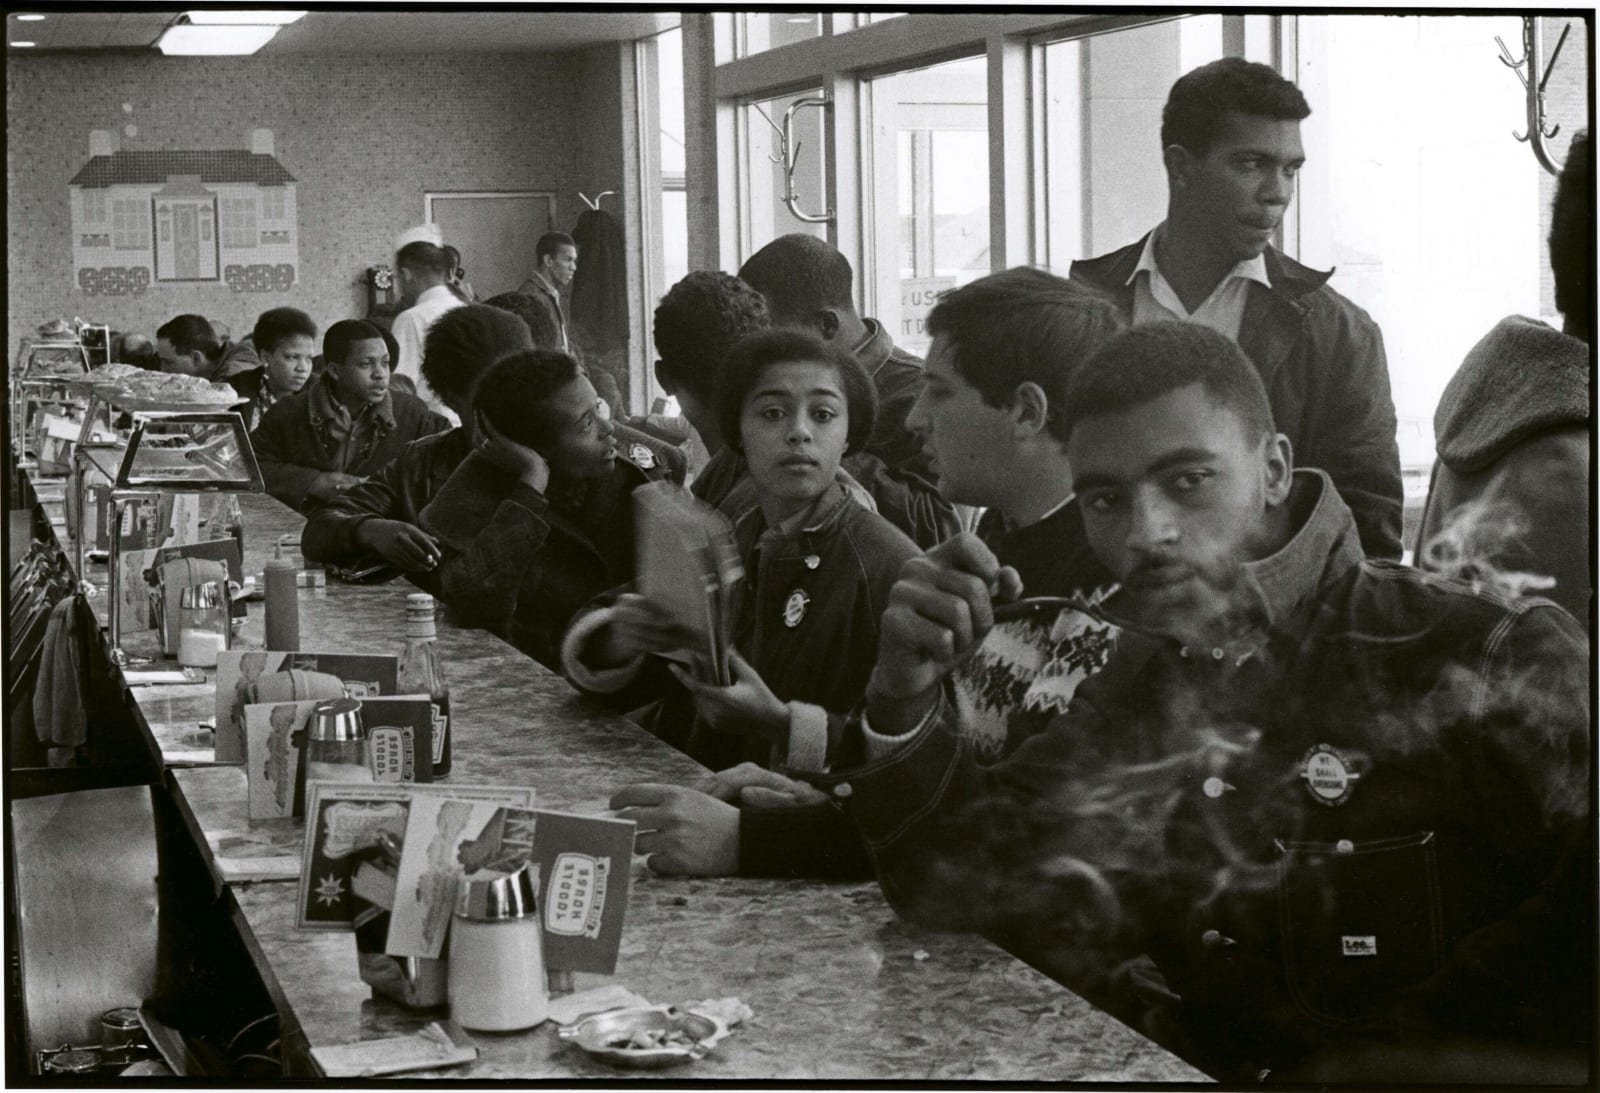 Danny Lyon, A sit-in at a Toddle House in Atlanta